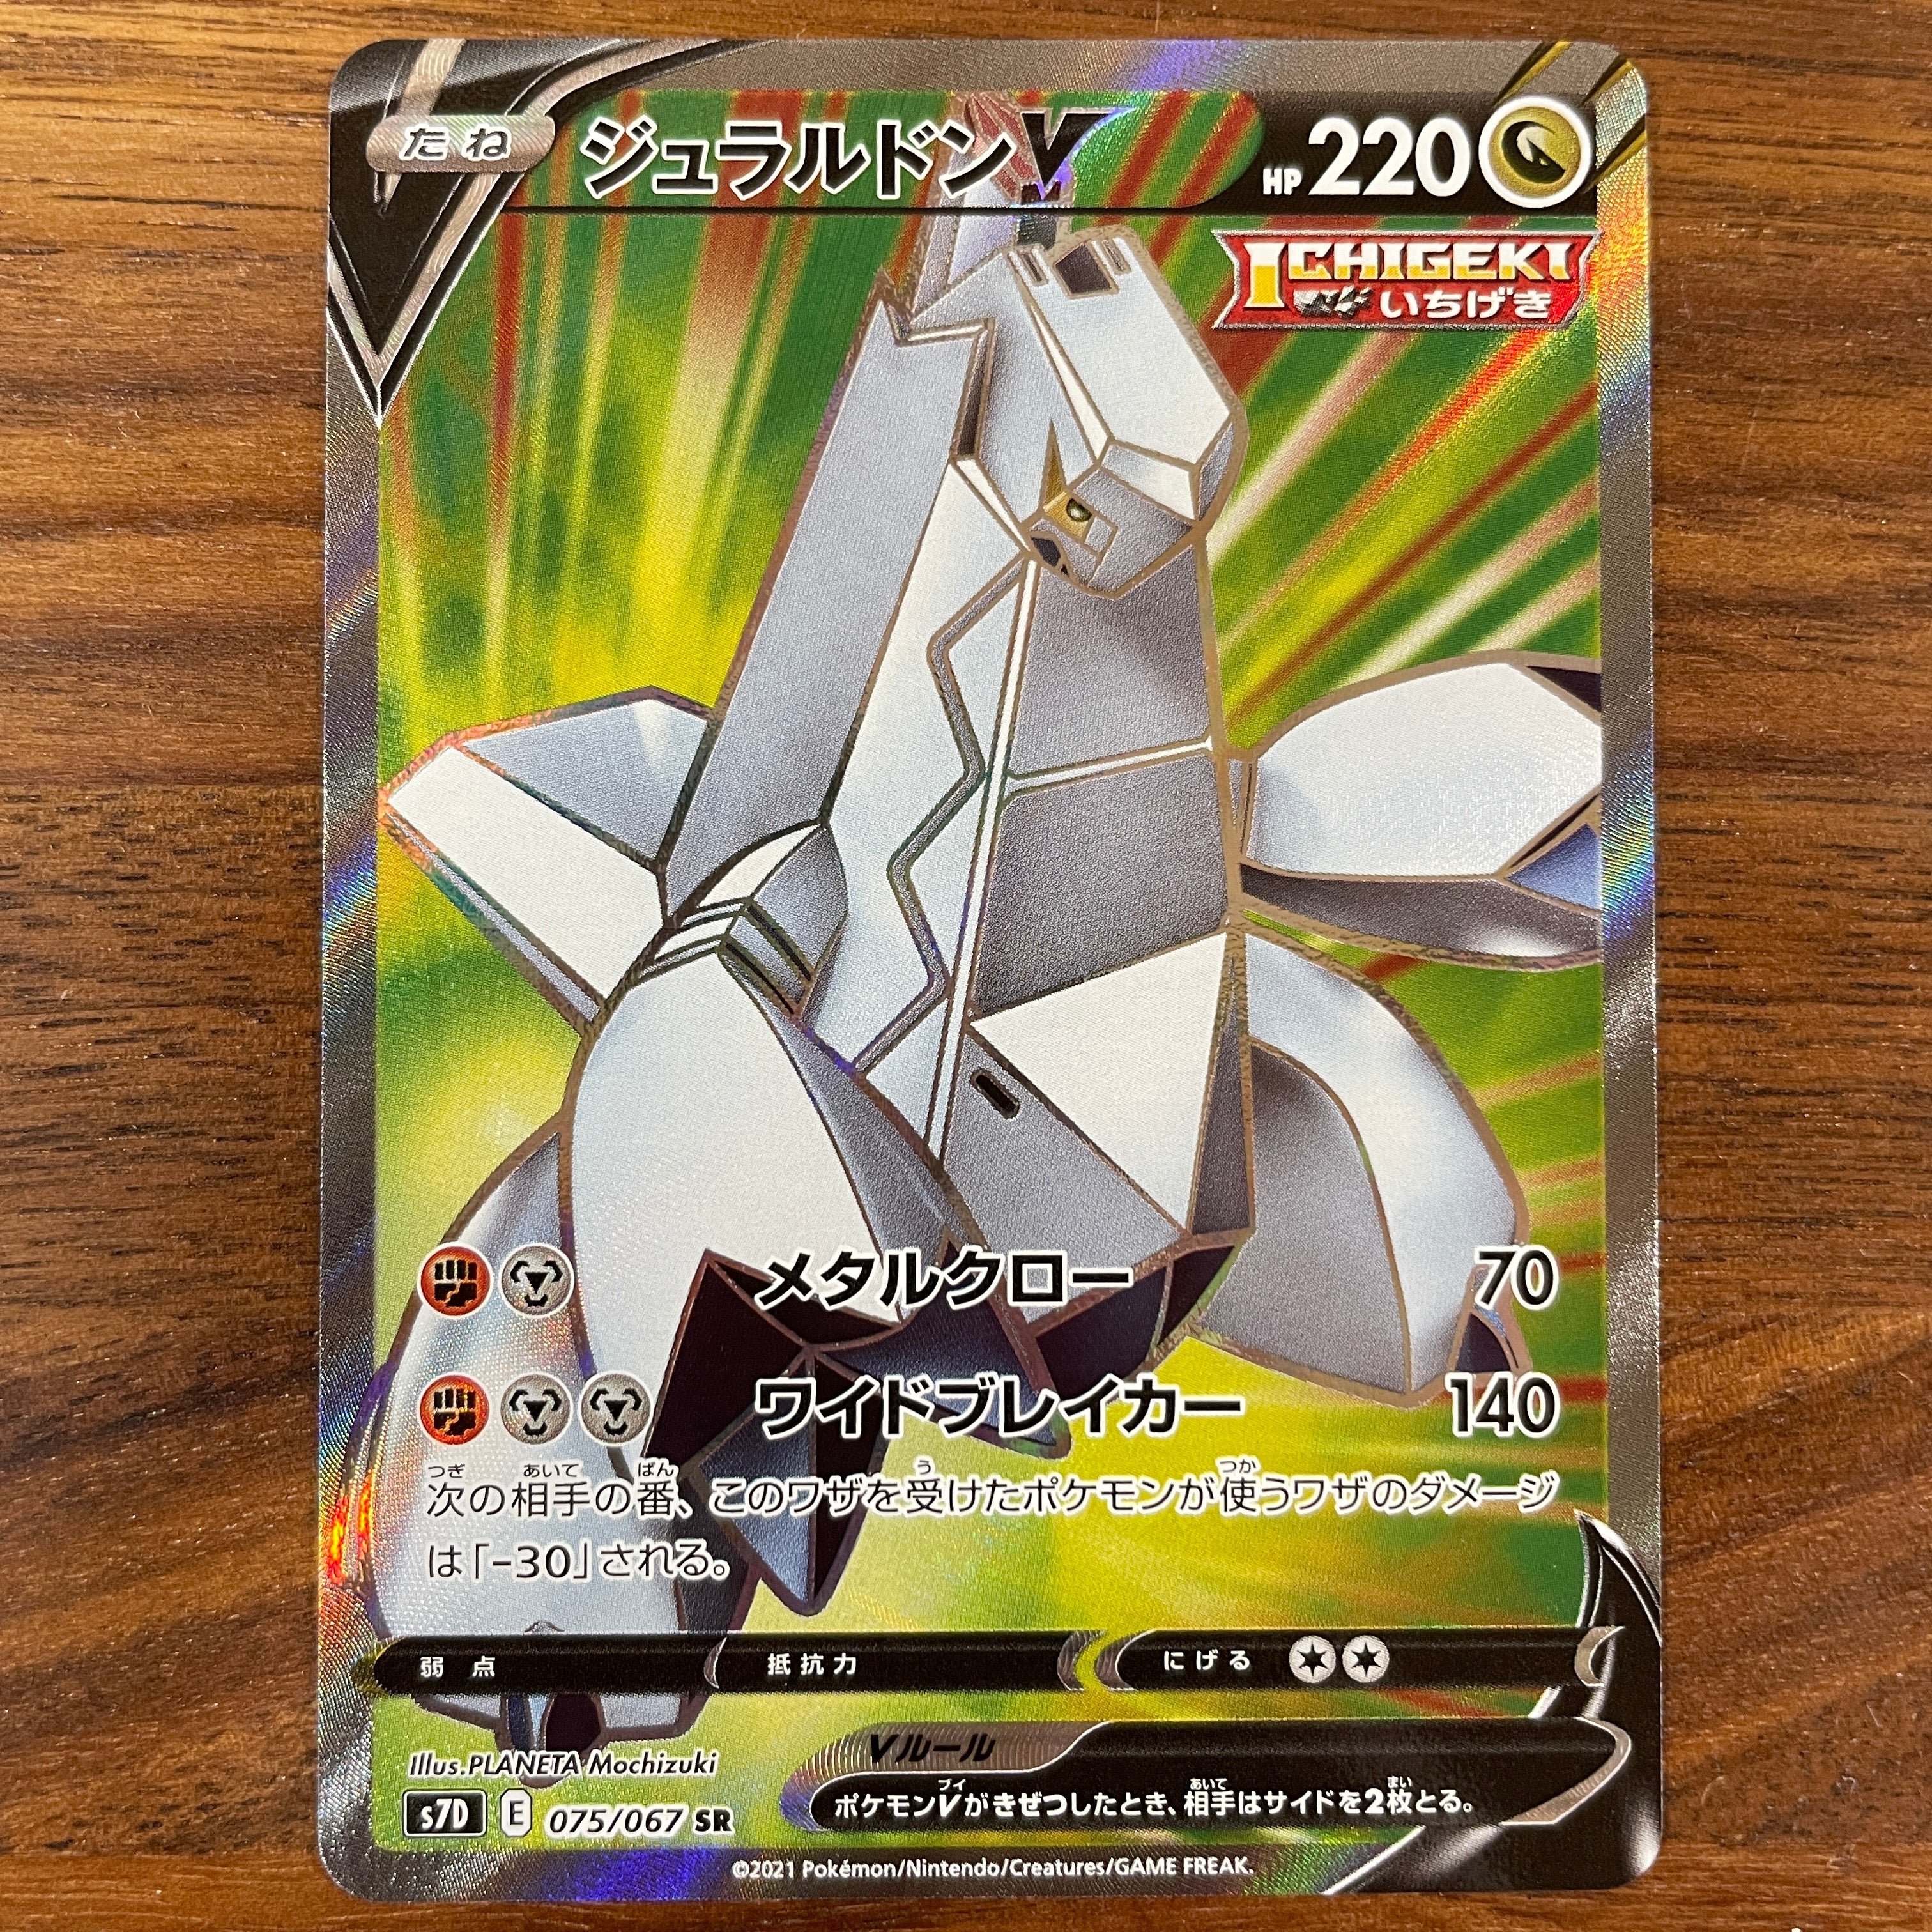 POKÉMON CARD GAME Sword & Shield Expansion pack ｢Skyscraping Perfect｣  POKÉMON CARD GAME S7D 075/069 Super Rare card  Duraludon V